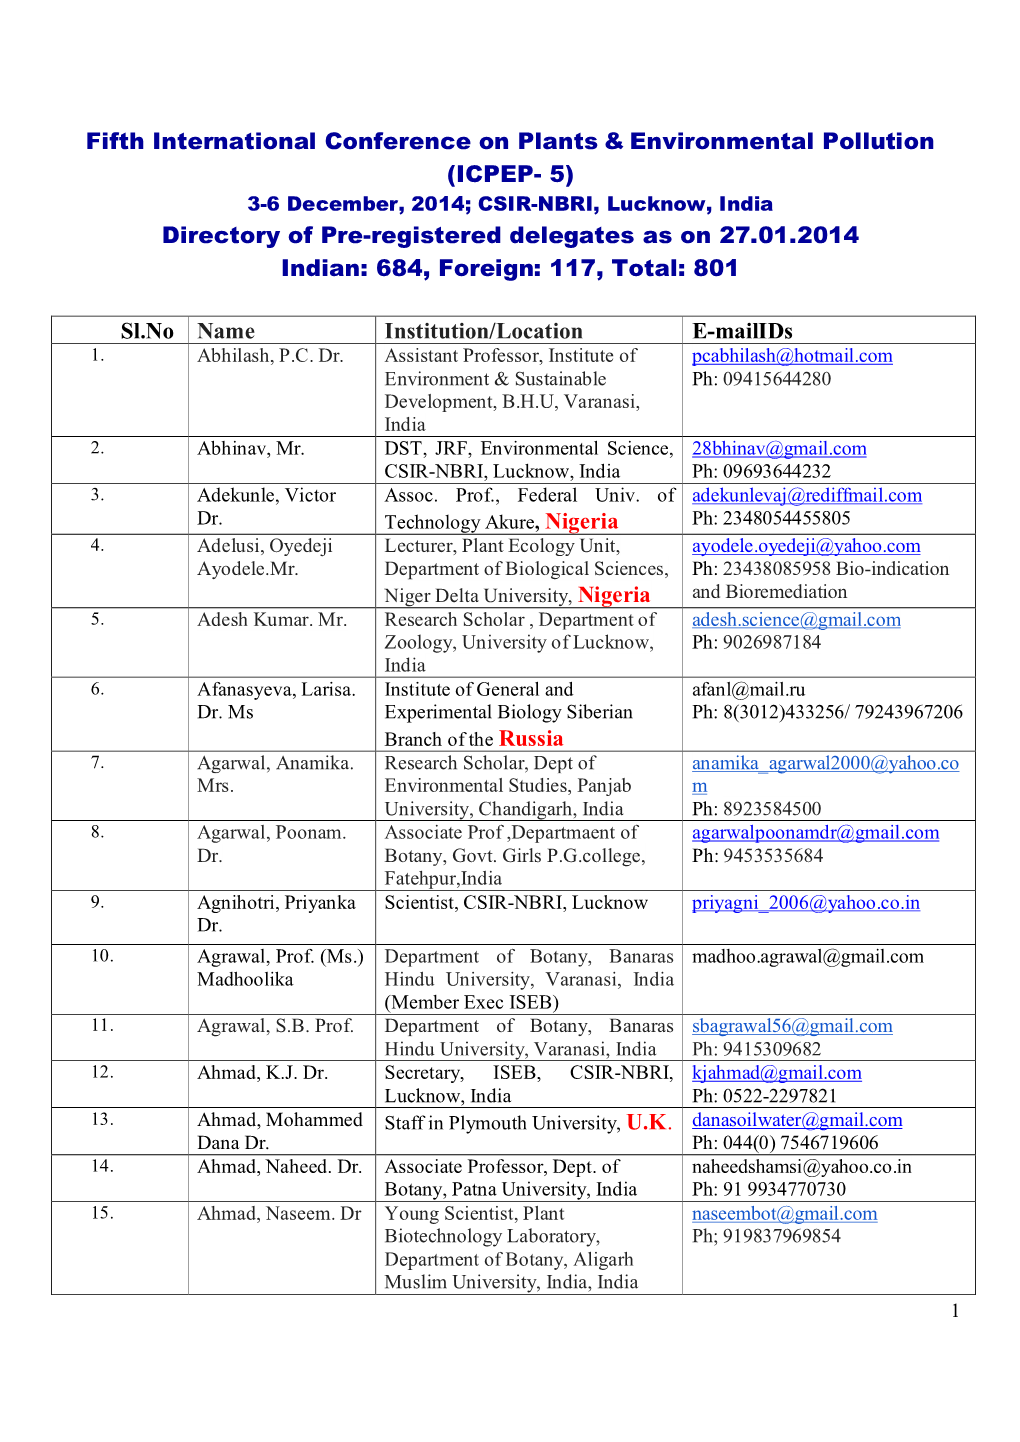 (ICPEP- 5) Directory of Pre-Registered Delegates As on 27